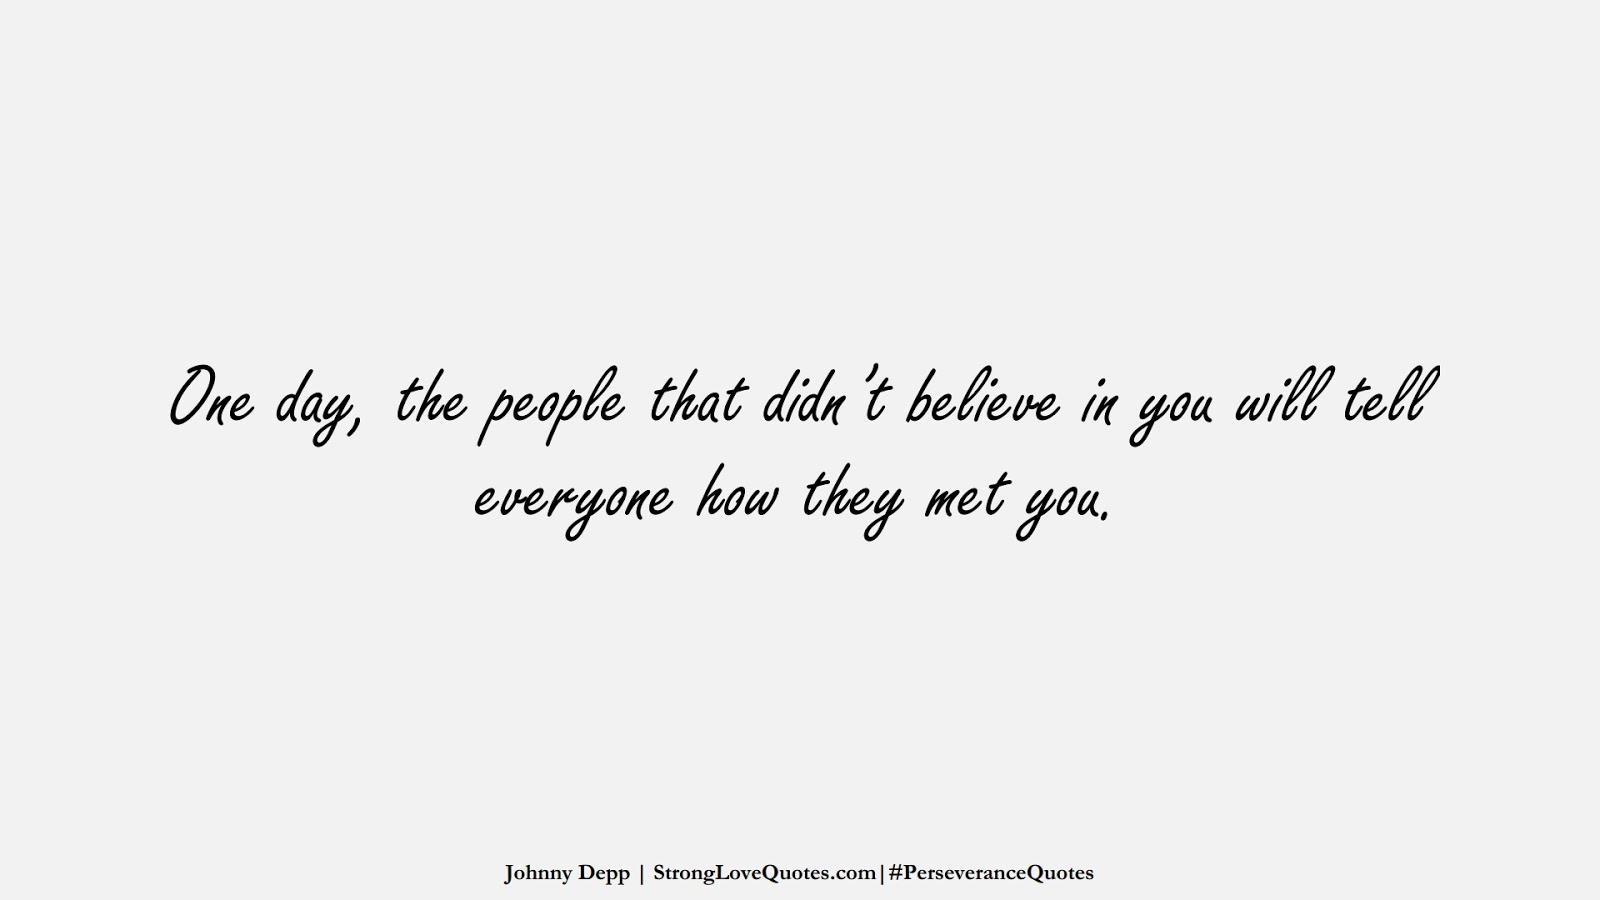 One day, the people that didn’t believe in you will tell everyone how they met you. (Johnny Depp);  #PerseveranceQuotes